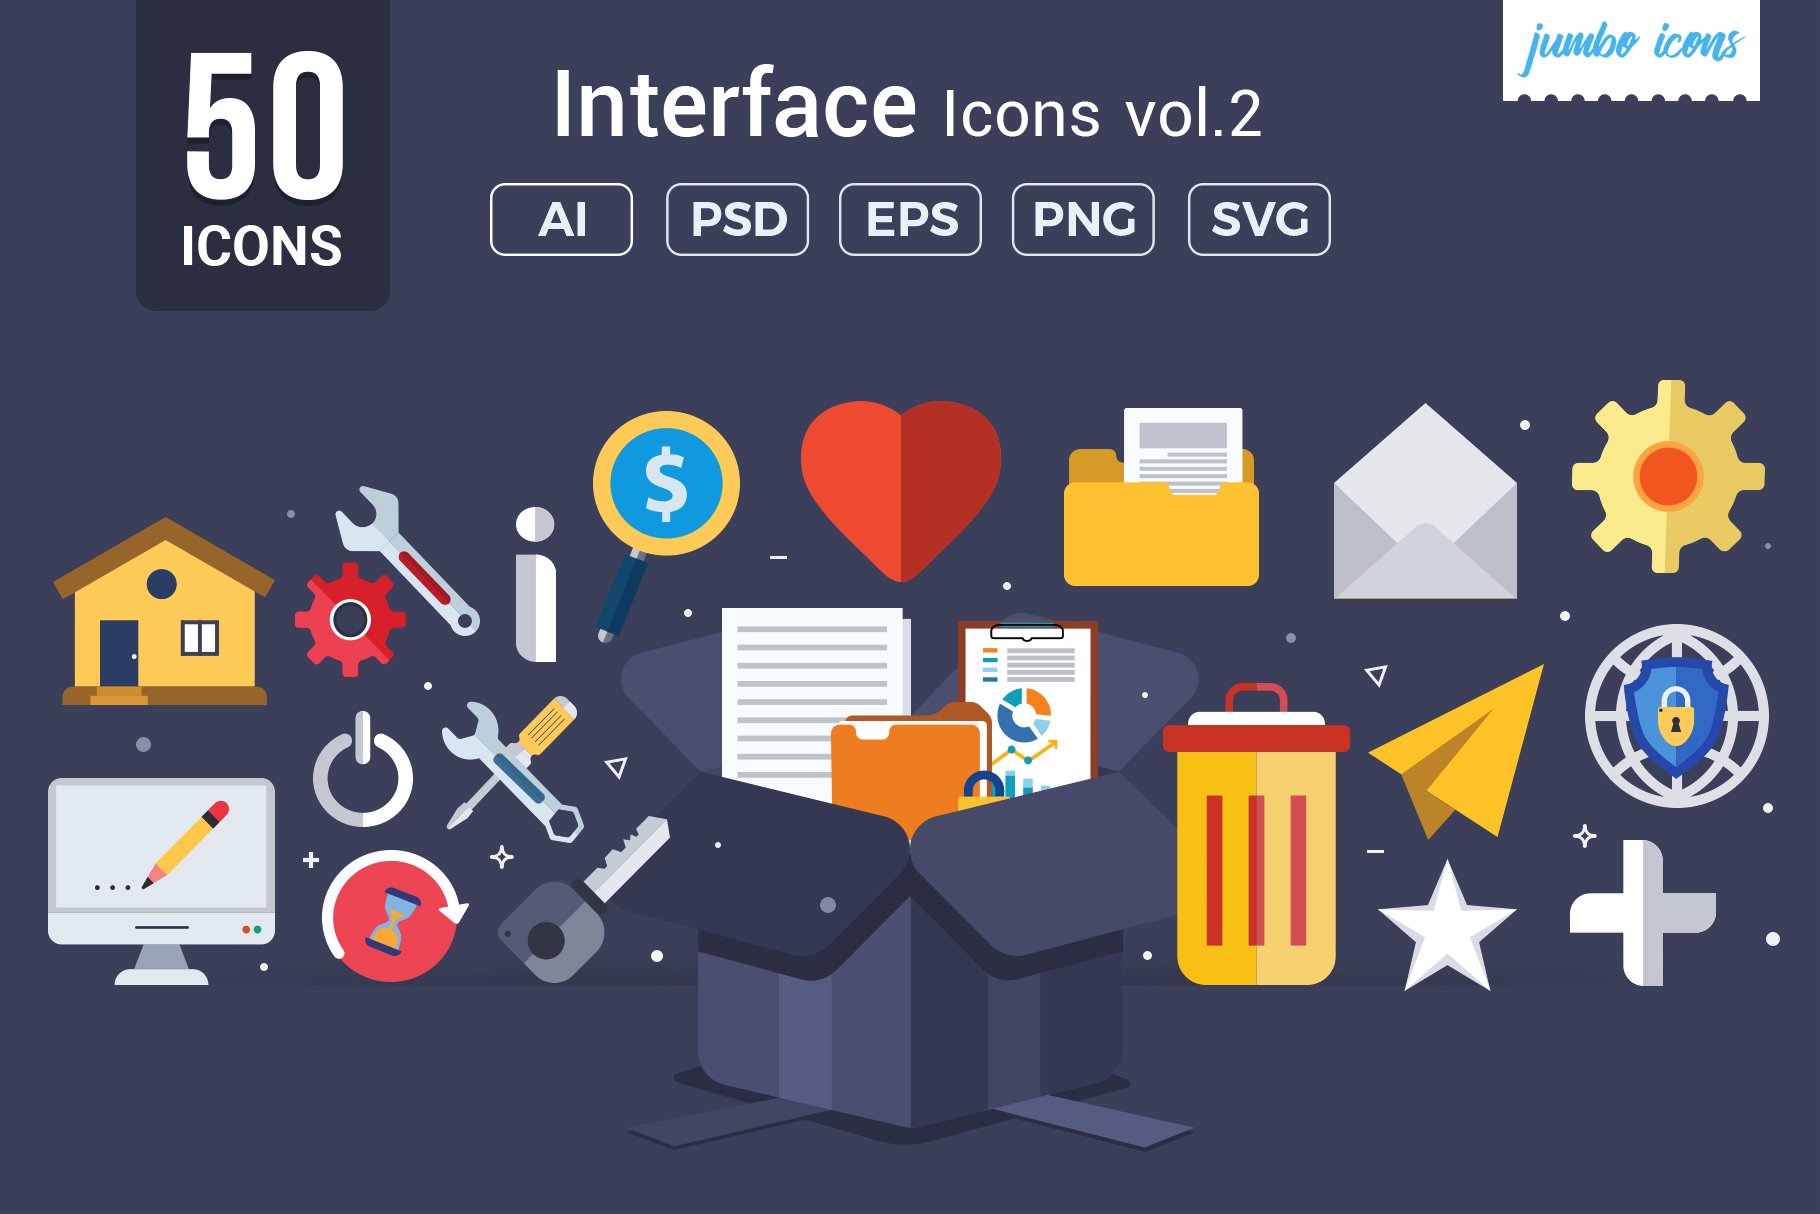 Interface Vector Icons V2 cover image.